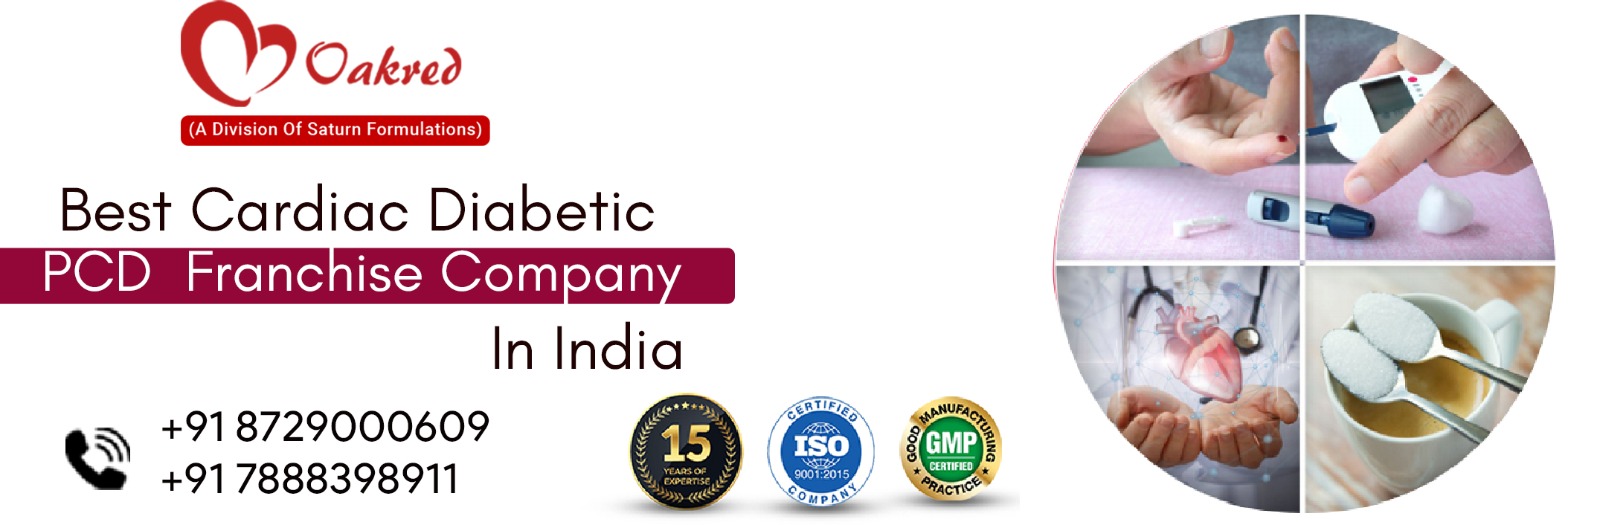 Top Cardiac Diabetic PCD Franchise Company in India | Saturn Formulations